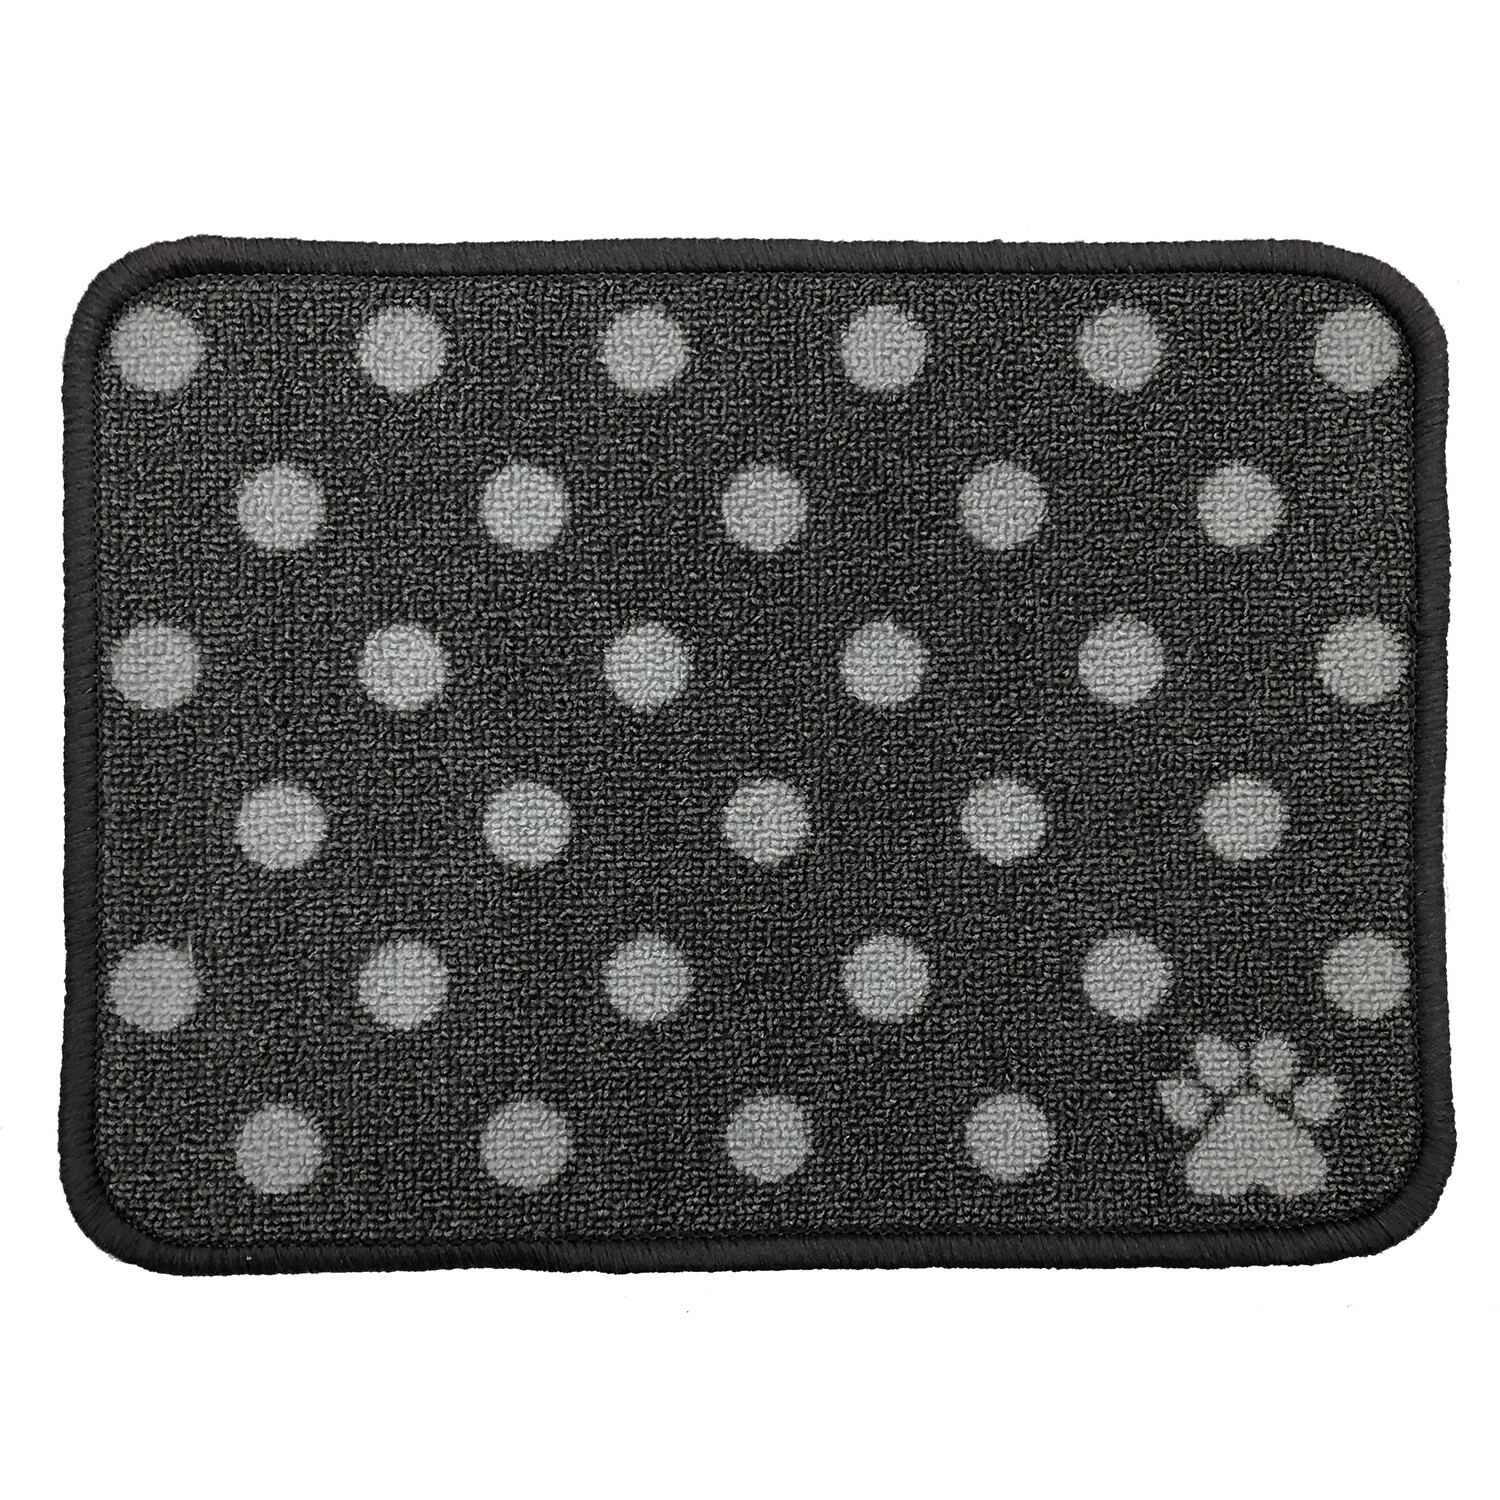 Mighty Paws 40 x 30cm Grey Dotted Pet Feeding Mat Image 2